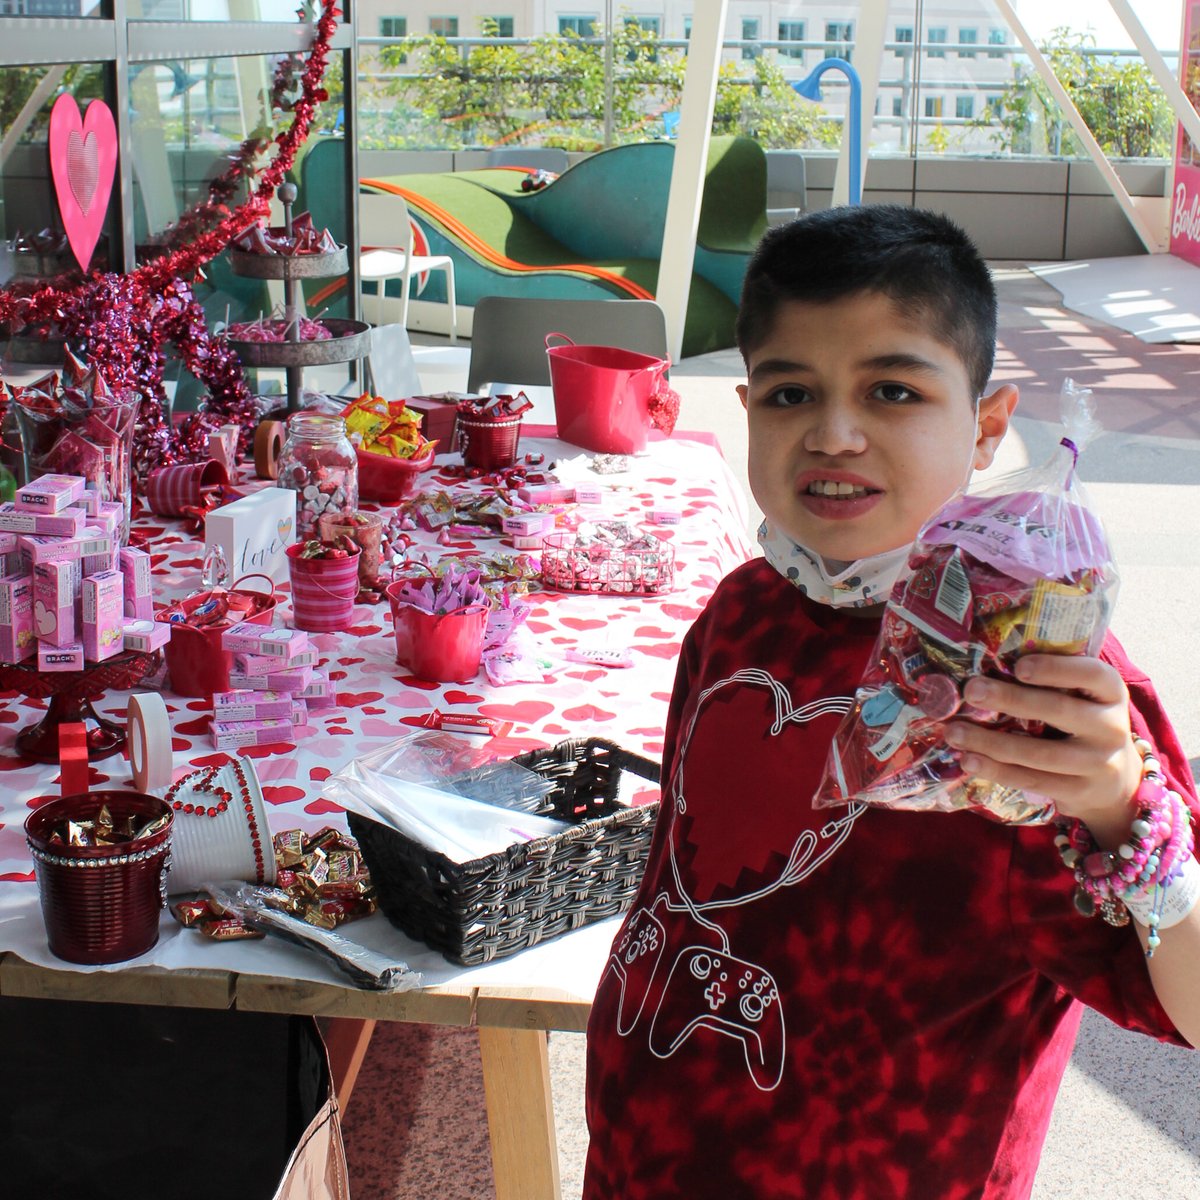 Creating heartwarming moments with individually packaged meals, a DIY candy station, and crafts. ❤️ Thank you Grace's Basket Foundation for stopping by again this year! #ValentinesDay